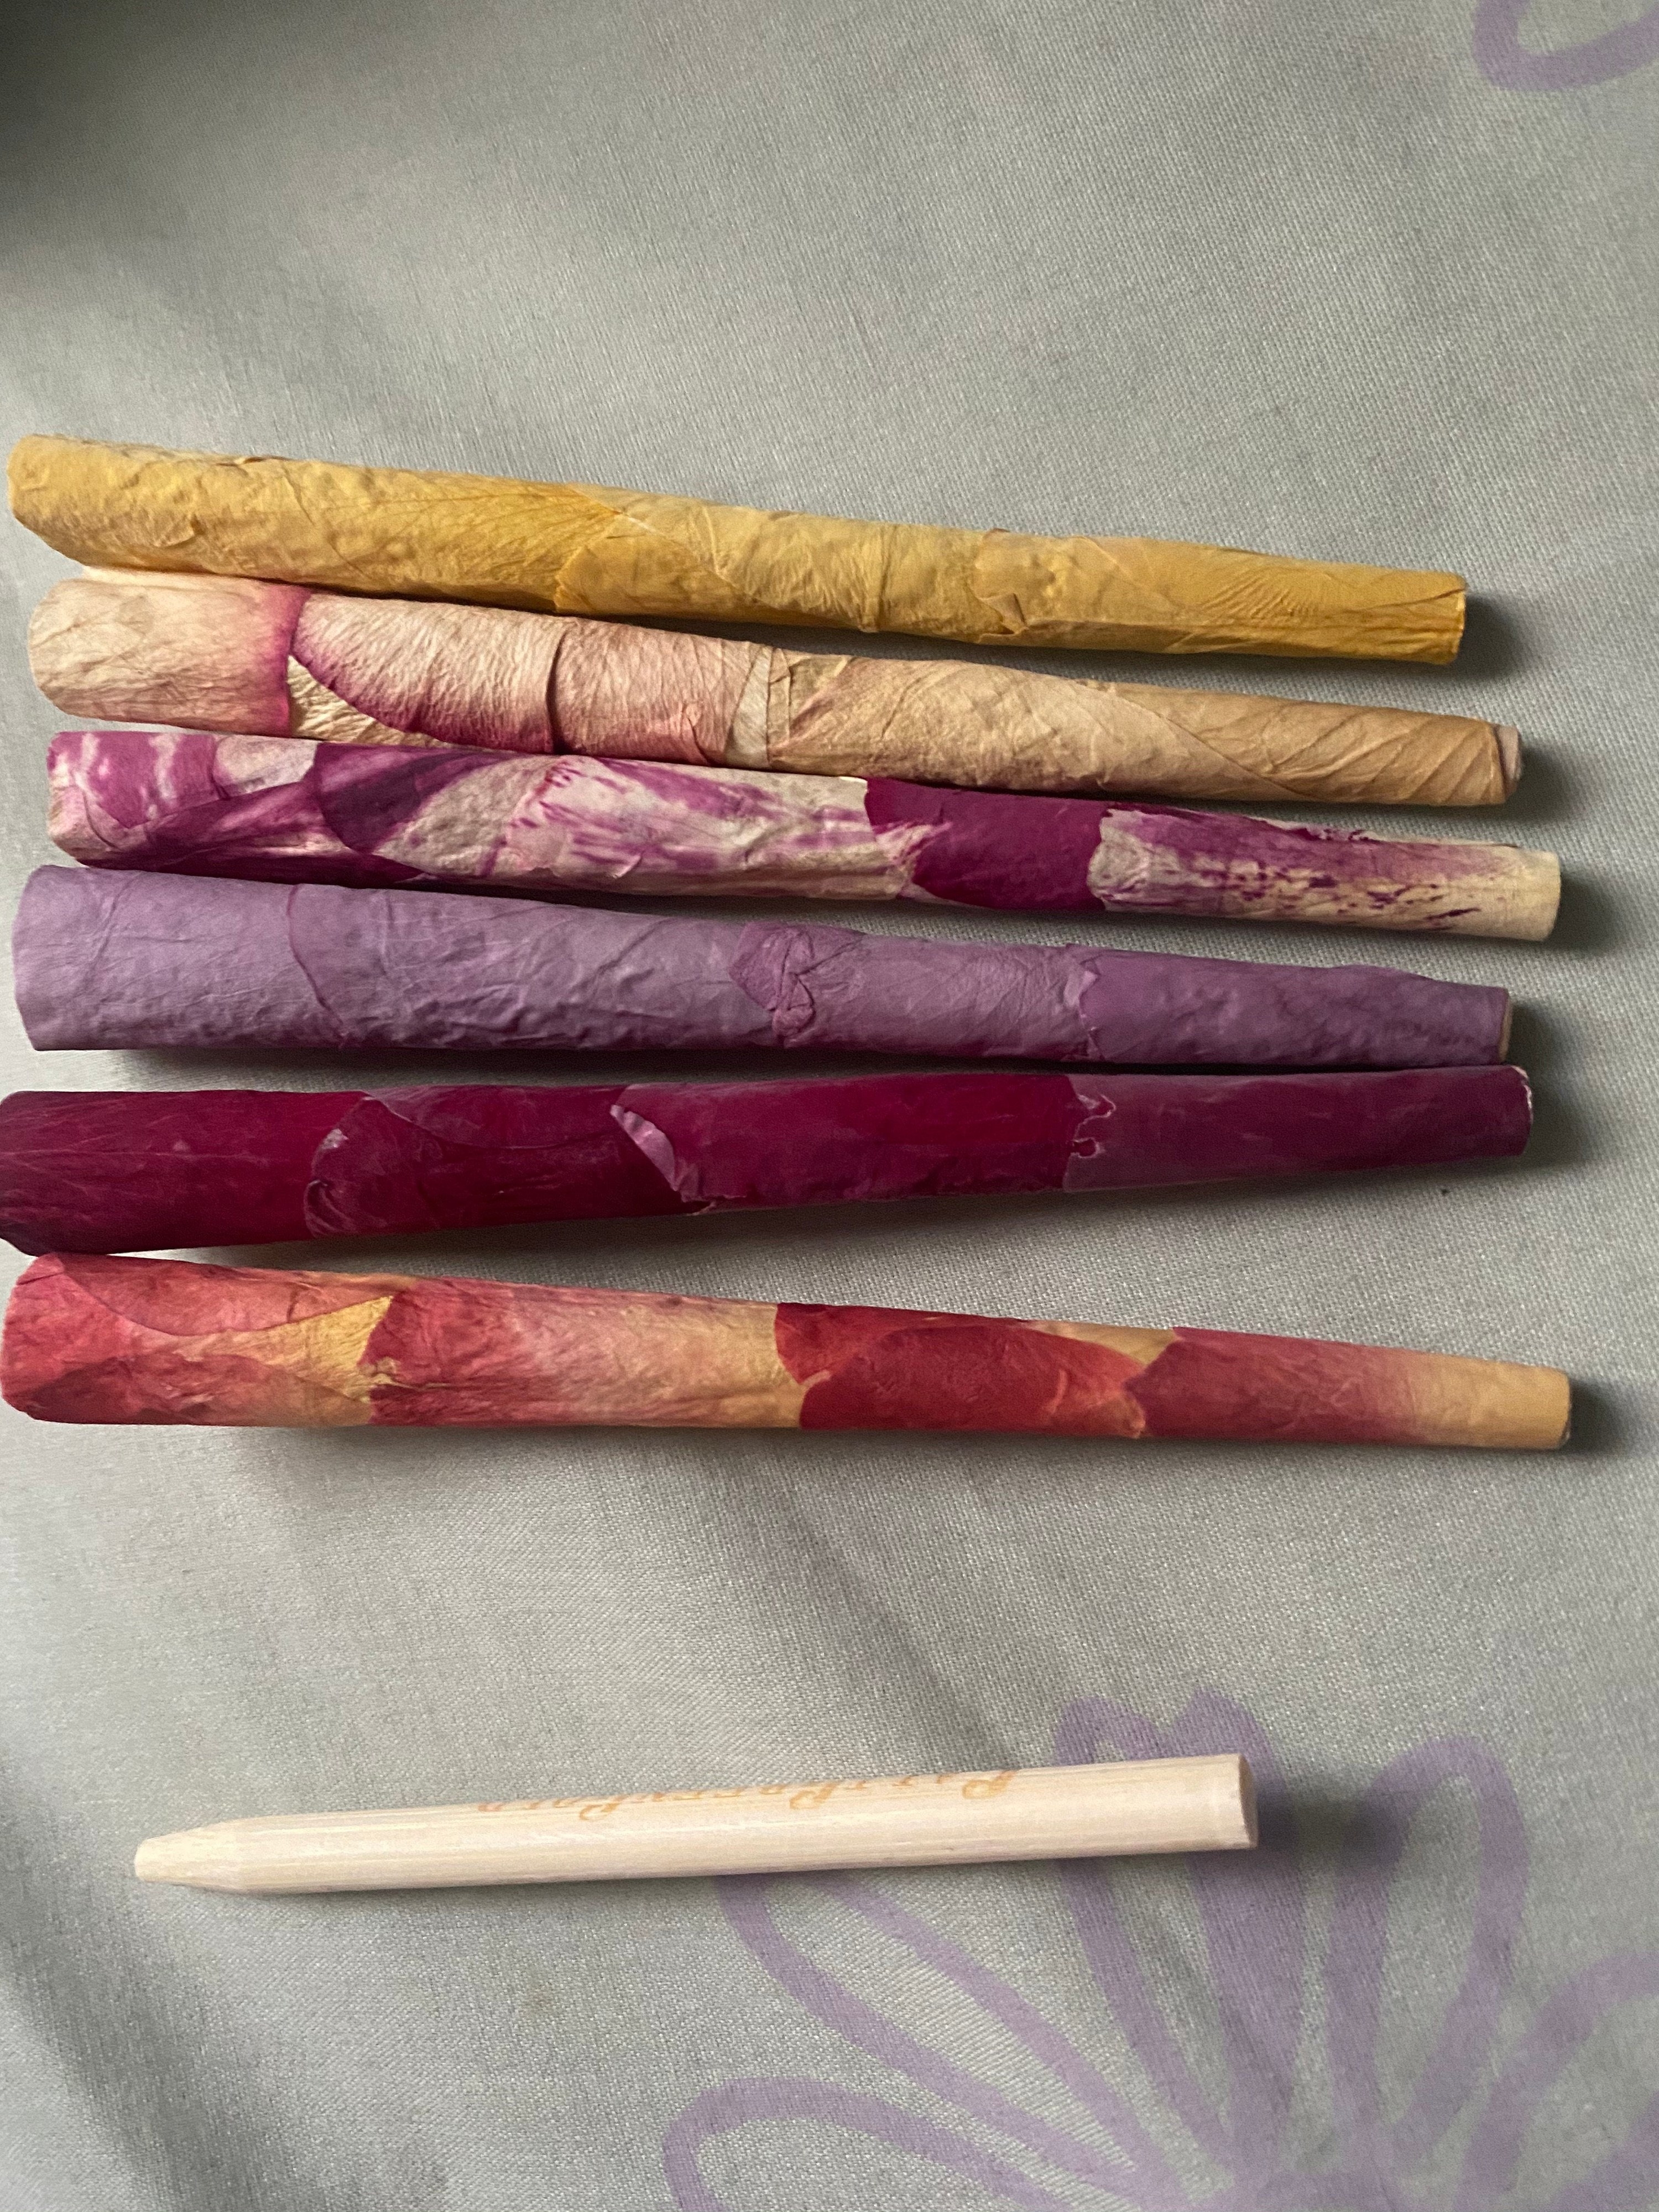 five pre-rolled cones made with rose petals in different colors including purple, pink, and yellow, and orange